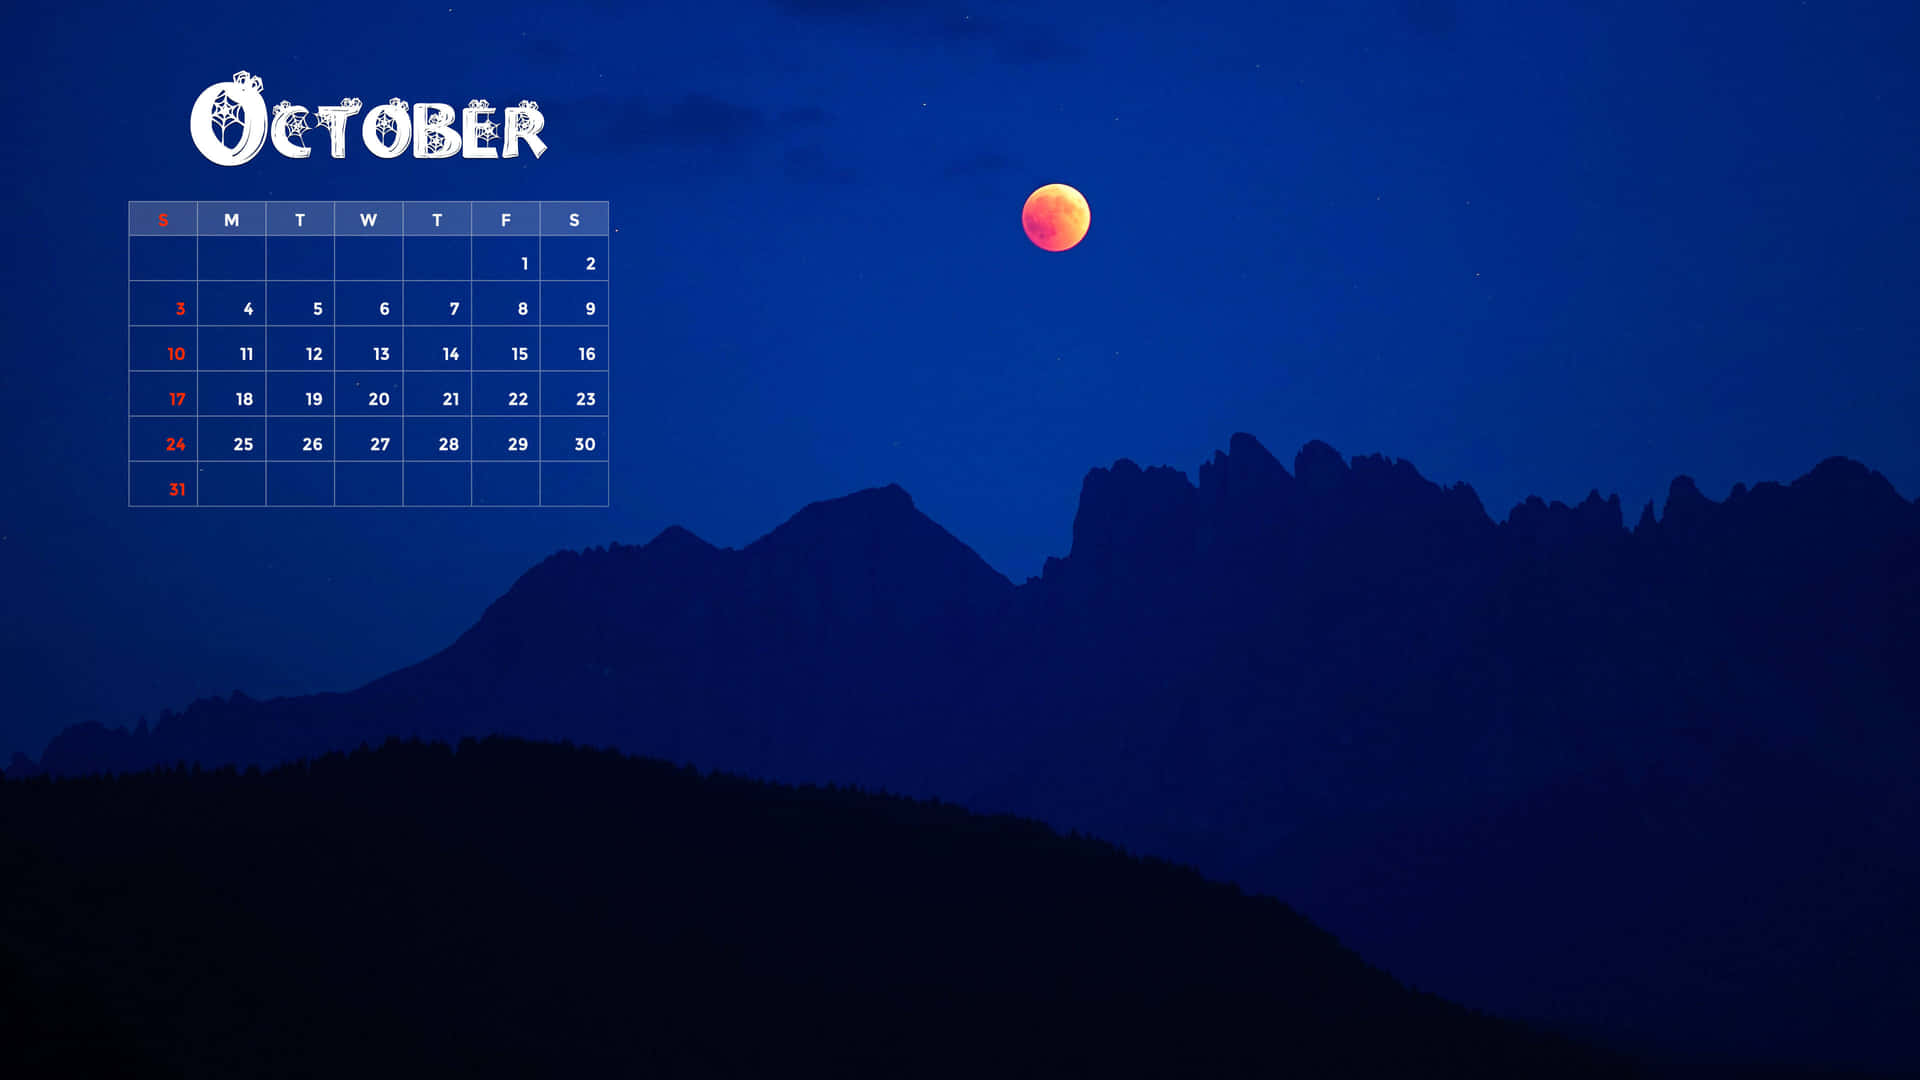 Plan your October 2021 with our exclusive October Calendar Wallpaper